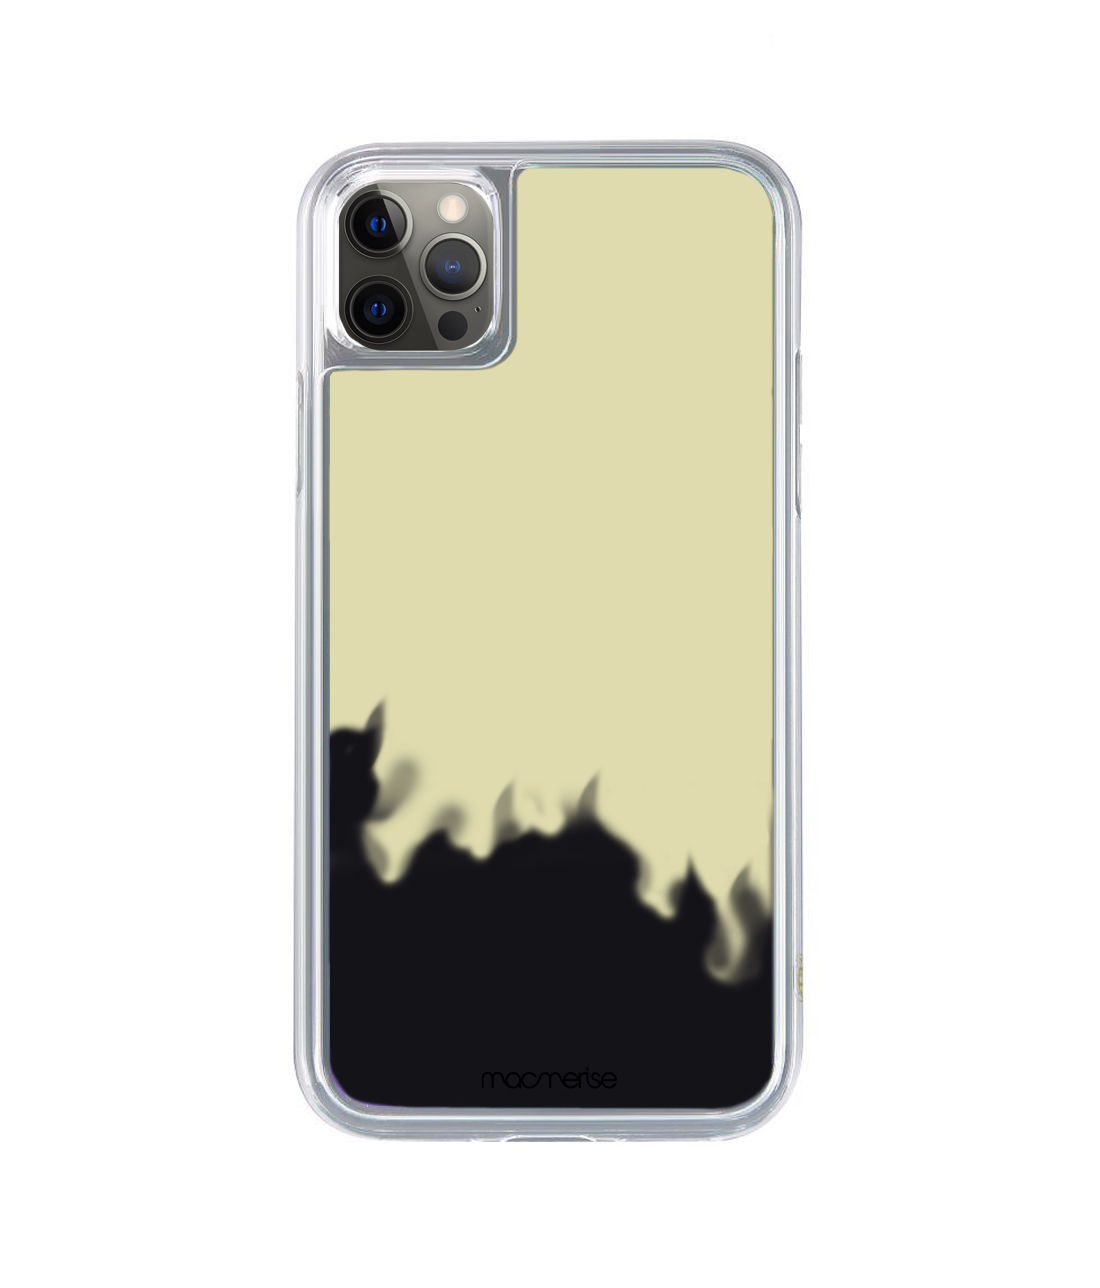 Neon Sand Black - Neon Sand Case for iPhone 12 Pro Max